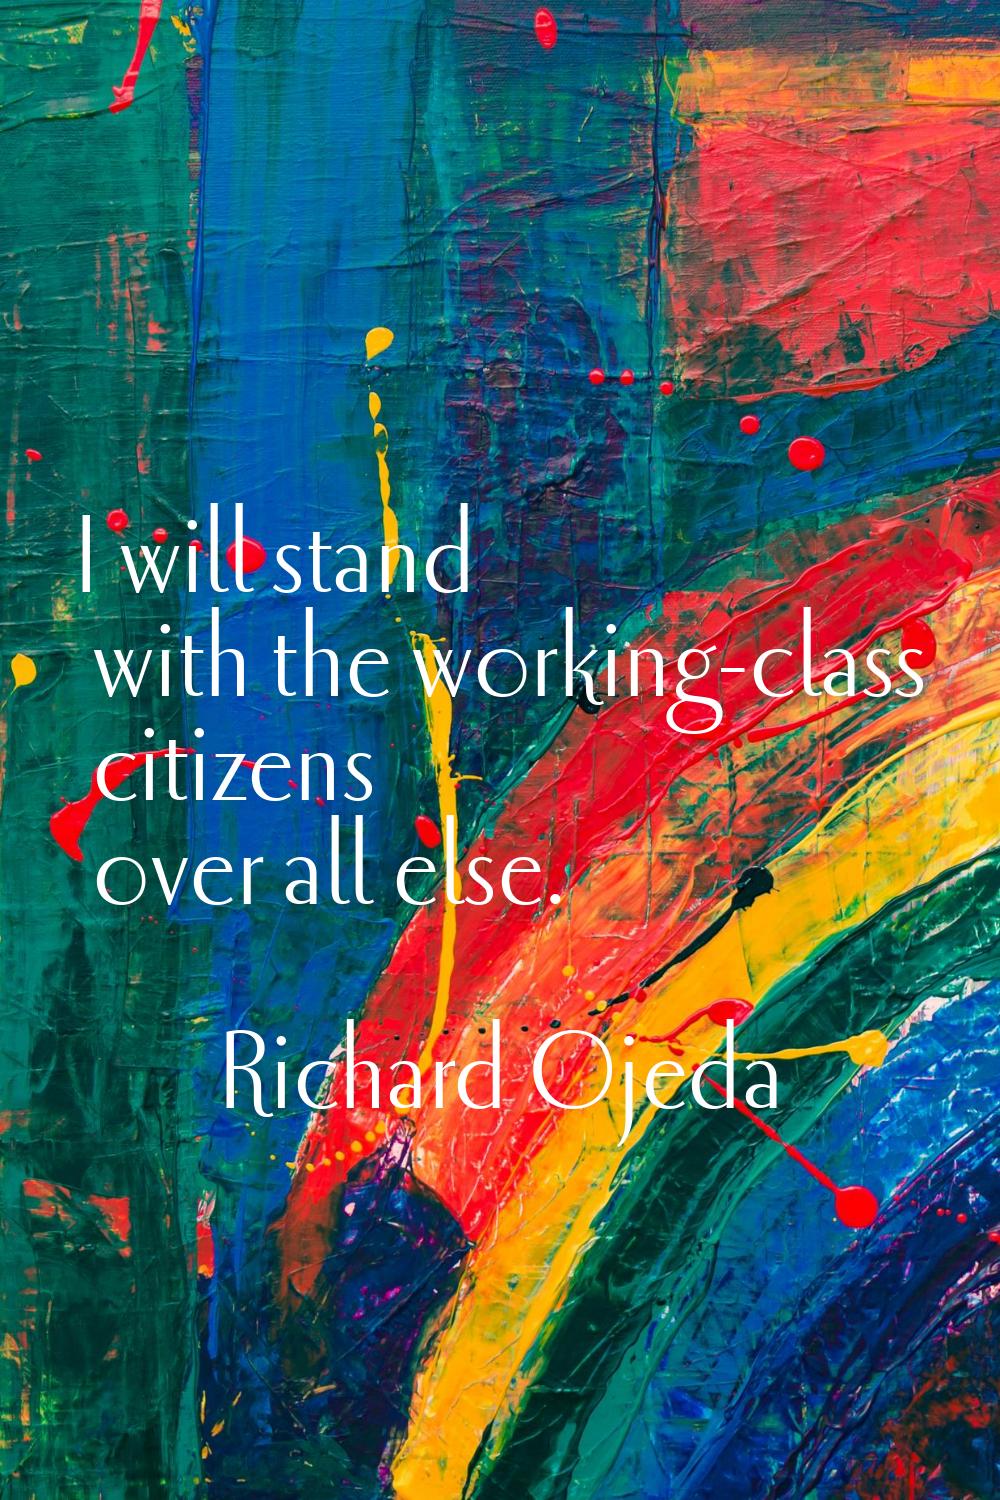 I will stand with the working-class citizens over all else.